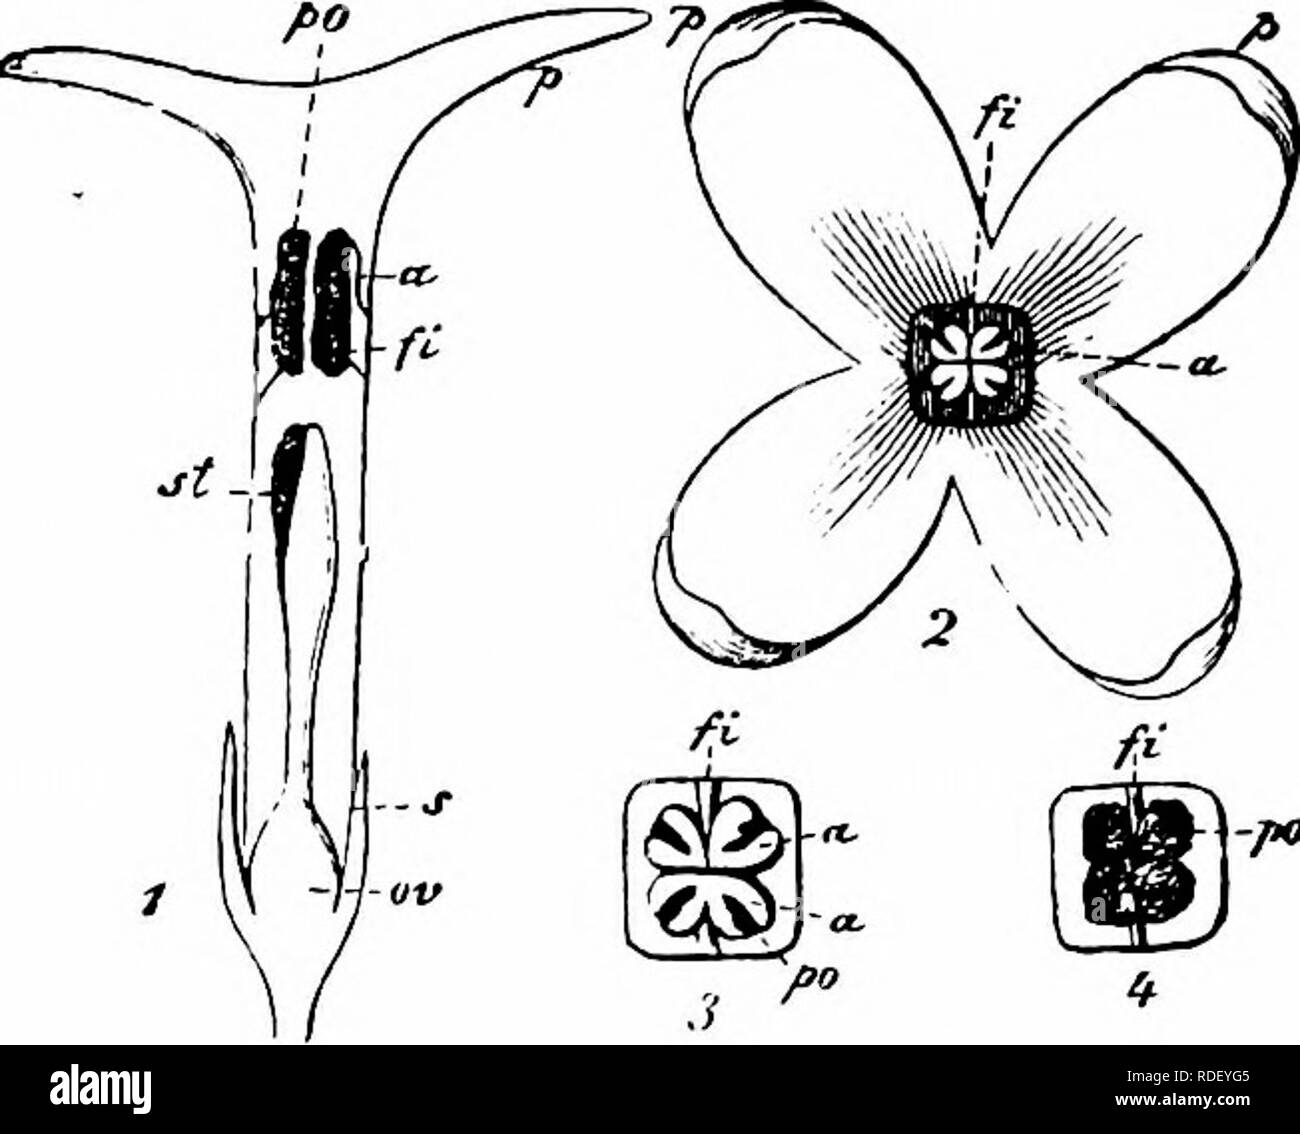 Handbook Of Flower Pollination Based Upon Hermann Mu Ller S Work The Fertilisation Of Flowers By Insects Fertilization Of Plants Ole Ace Ae 555 Syringa L Flowers Homogamous Rarely Protandrous